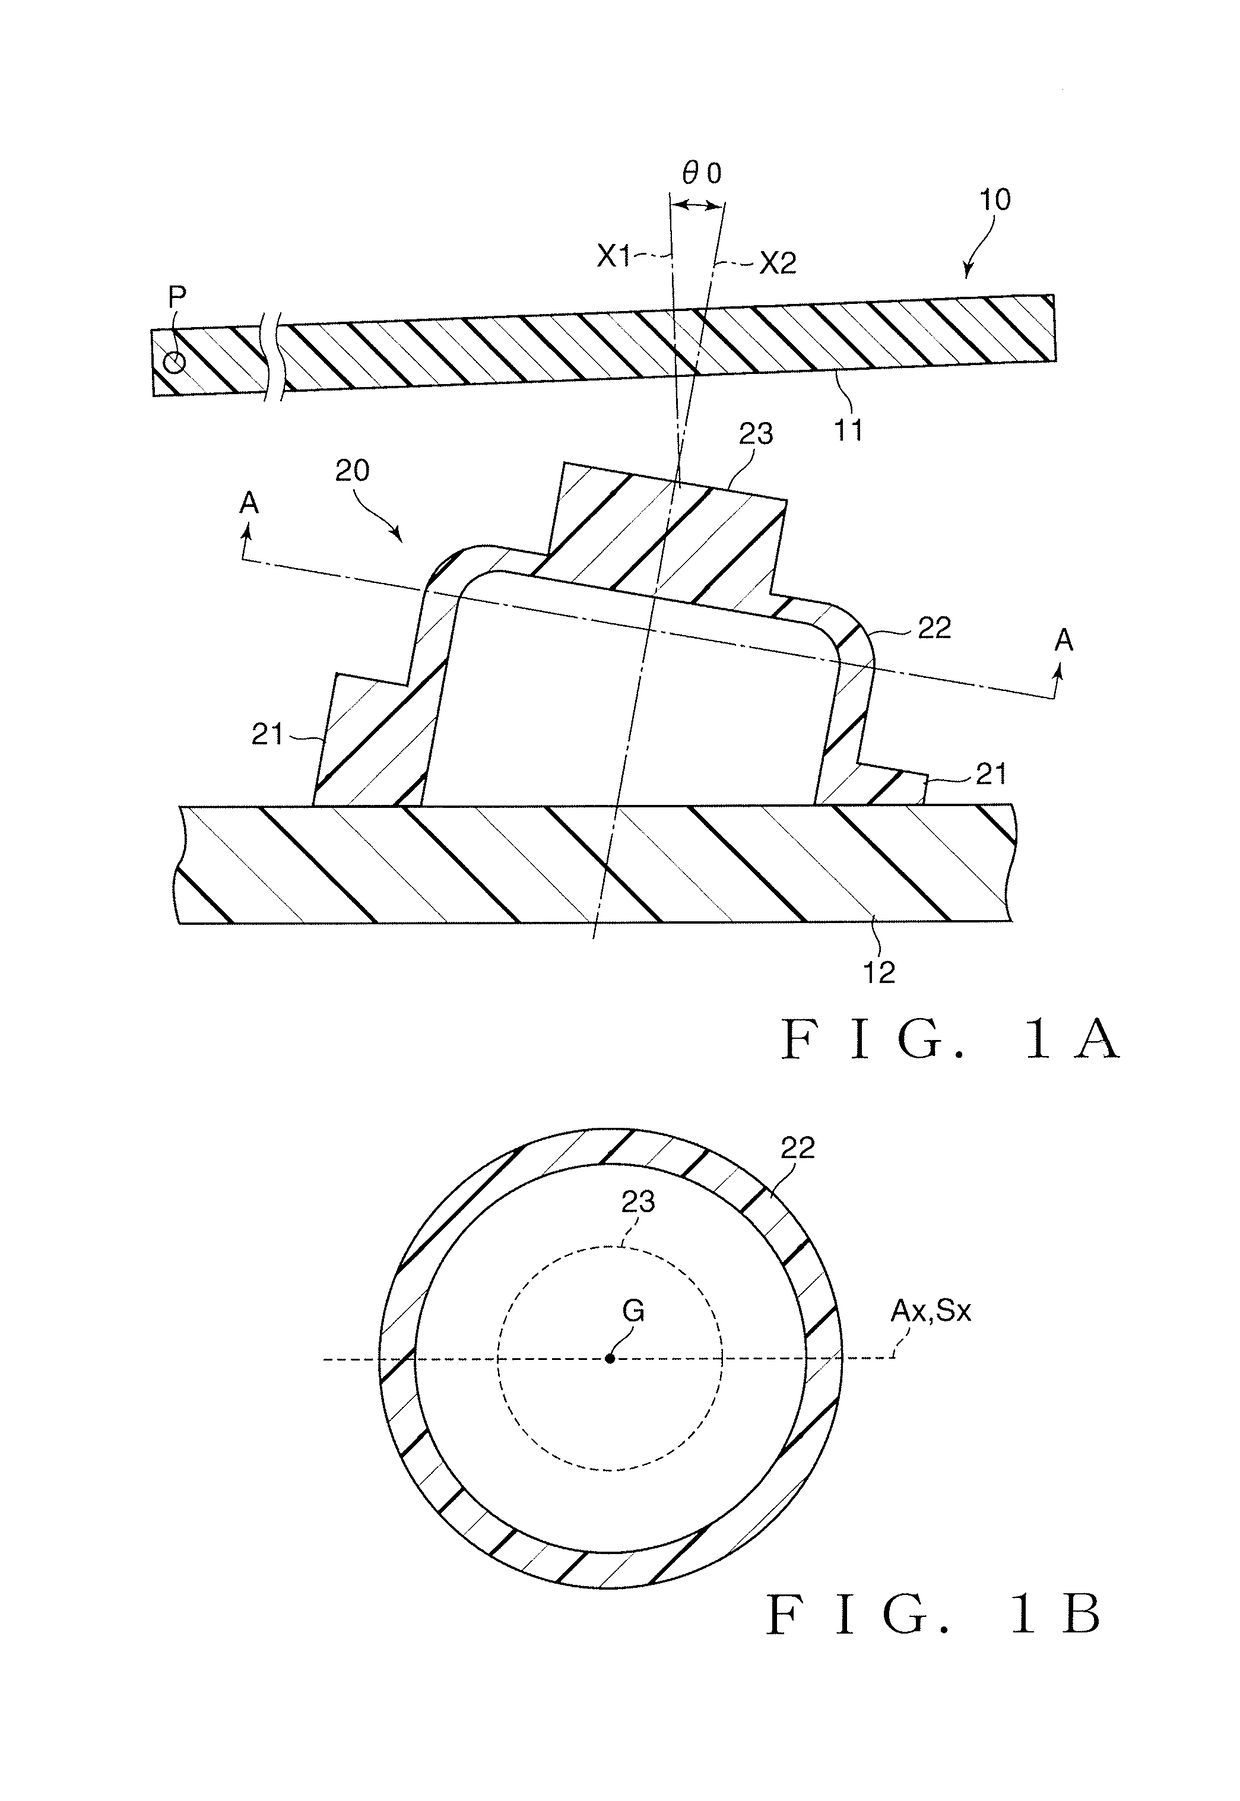 Reactive force generation device